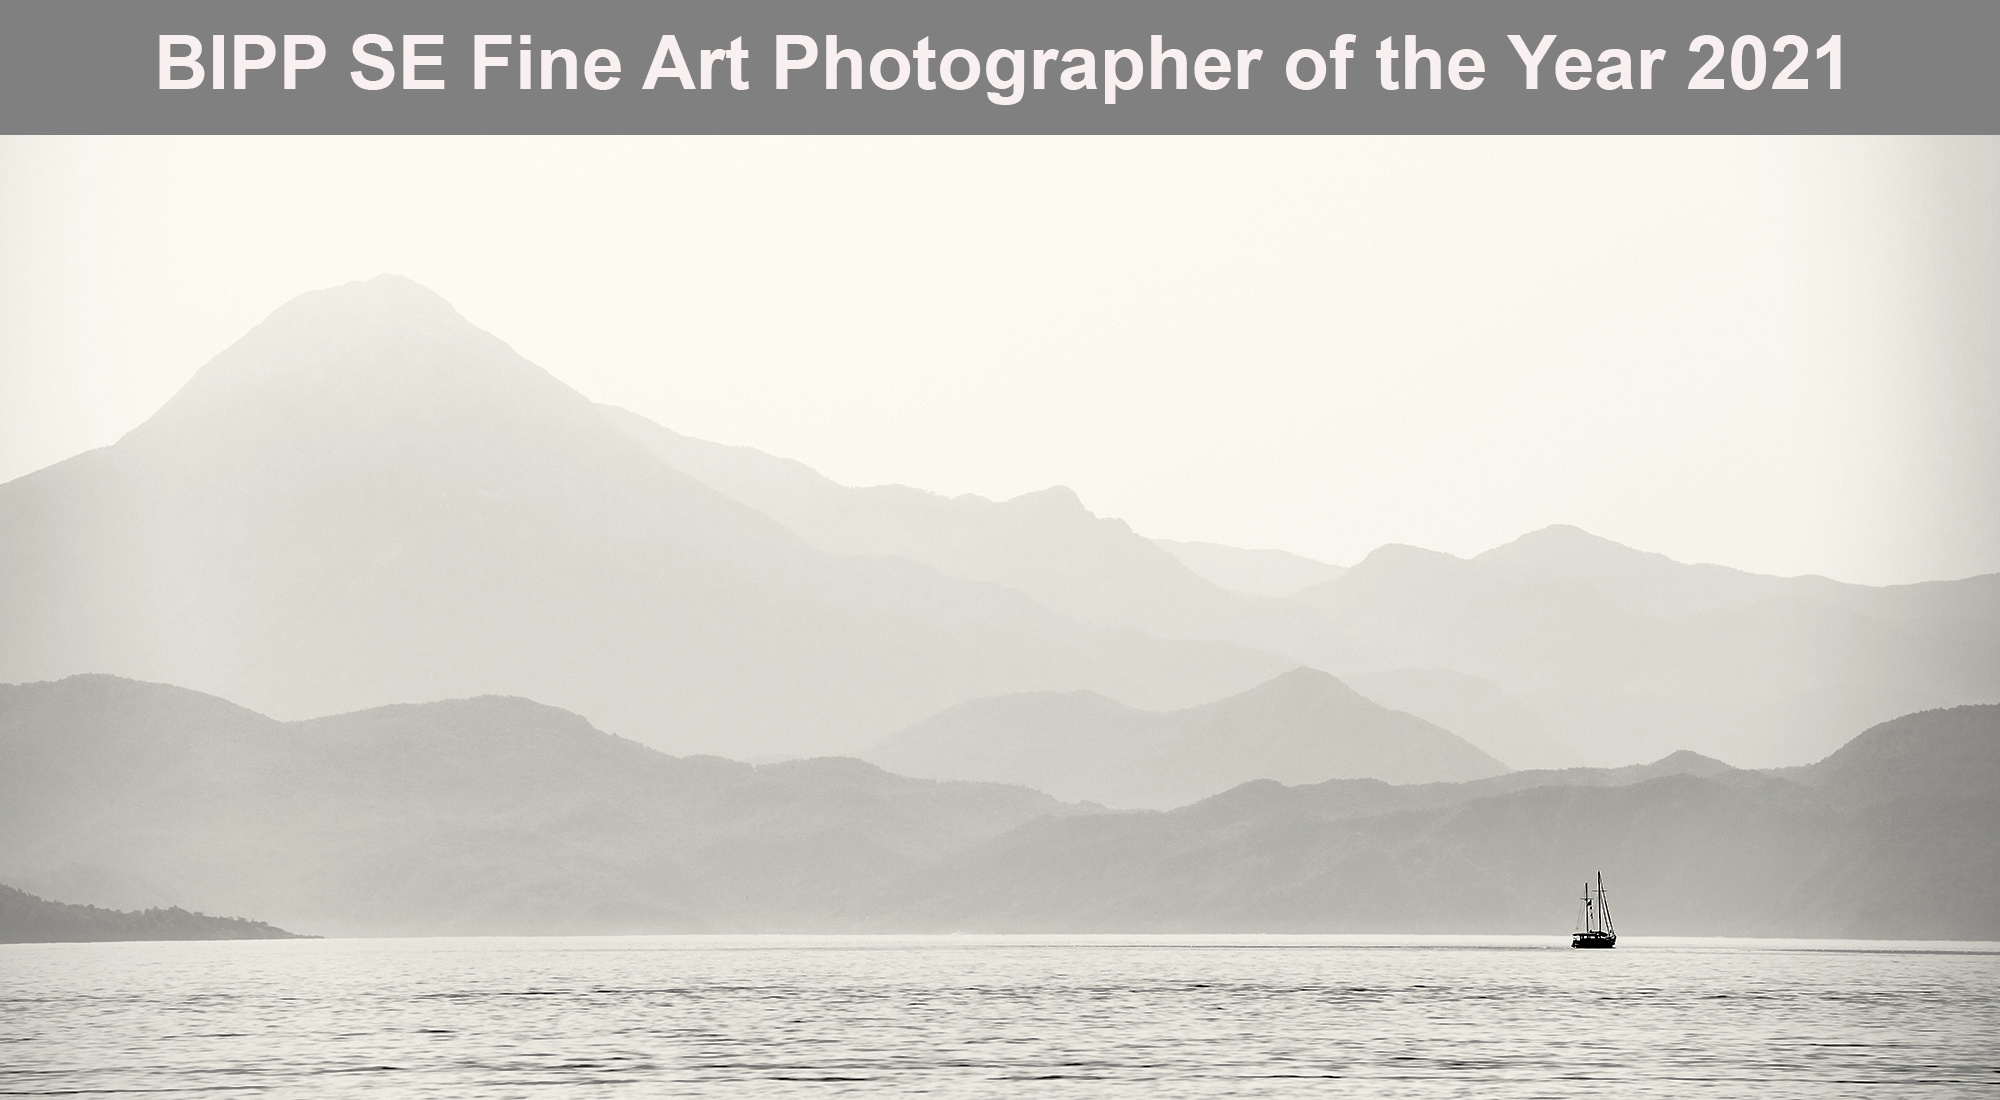 Winning images for Fine Art Photographer of the Year